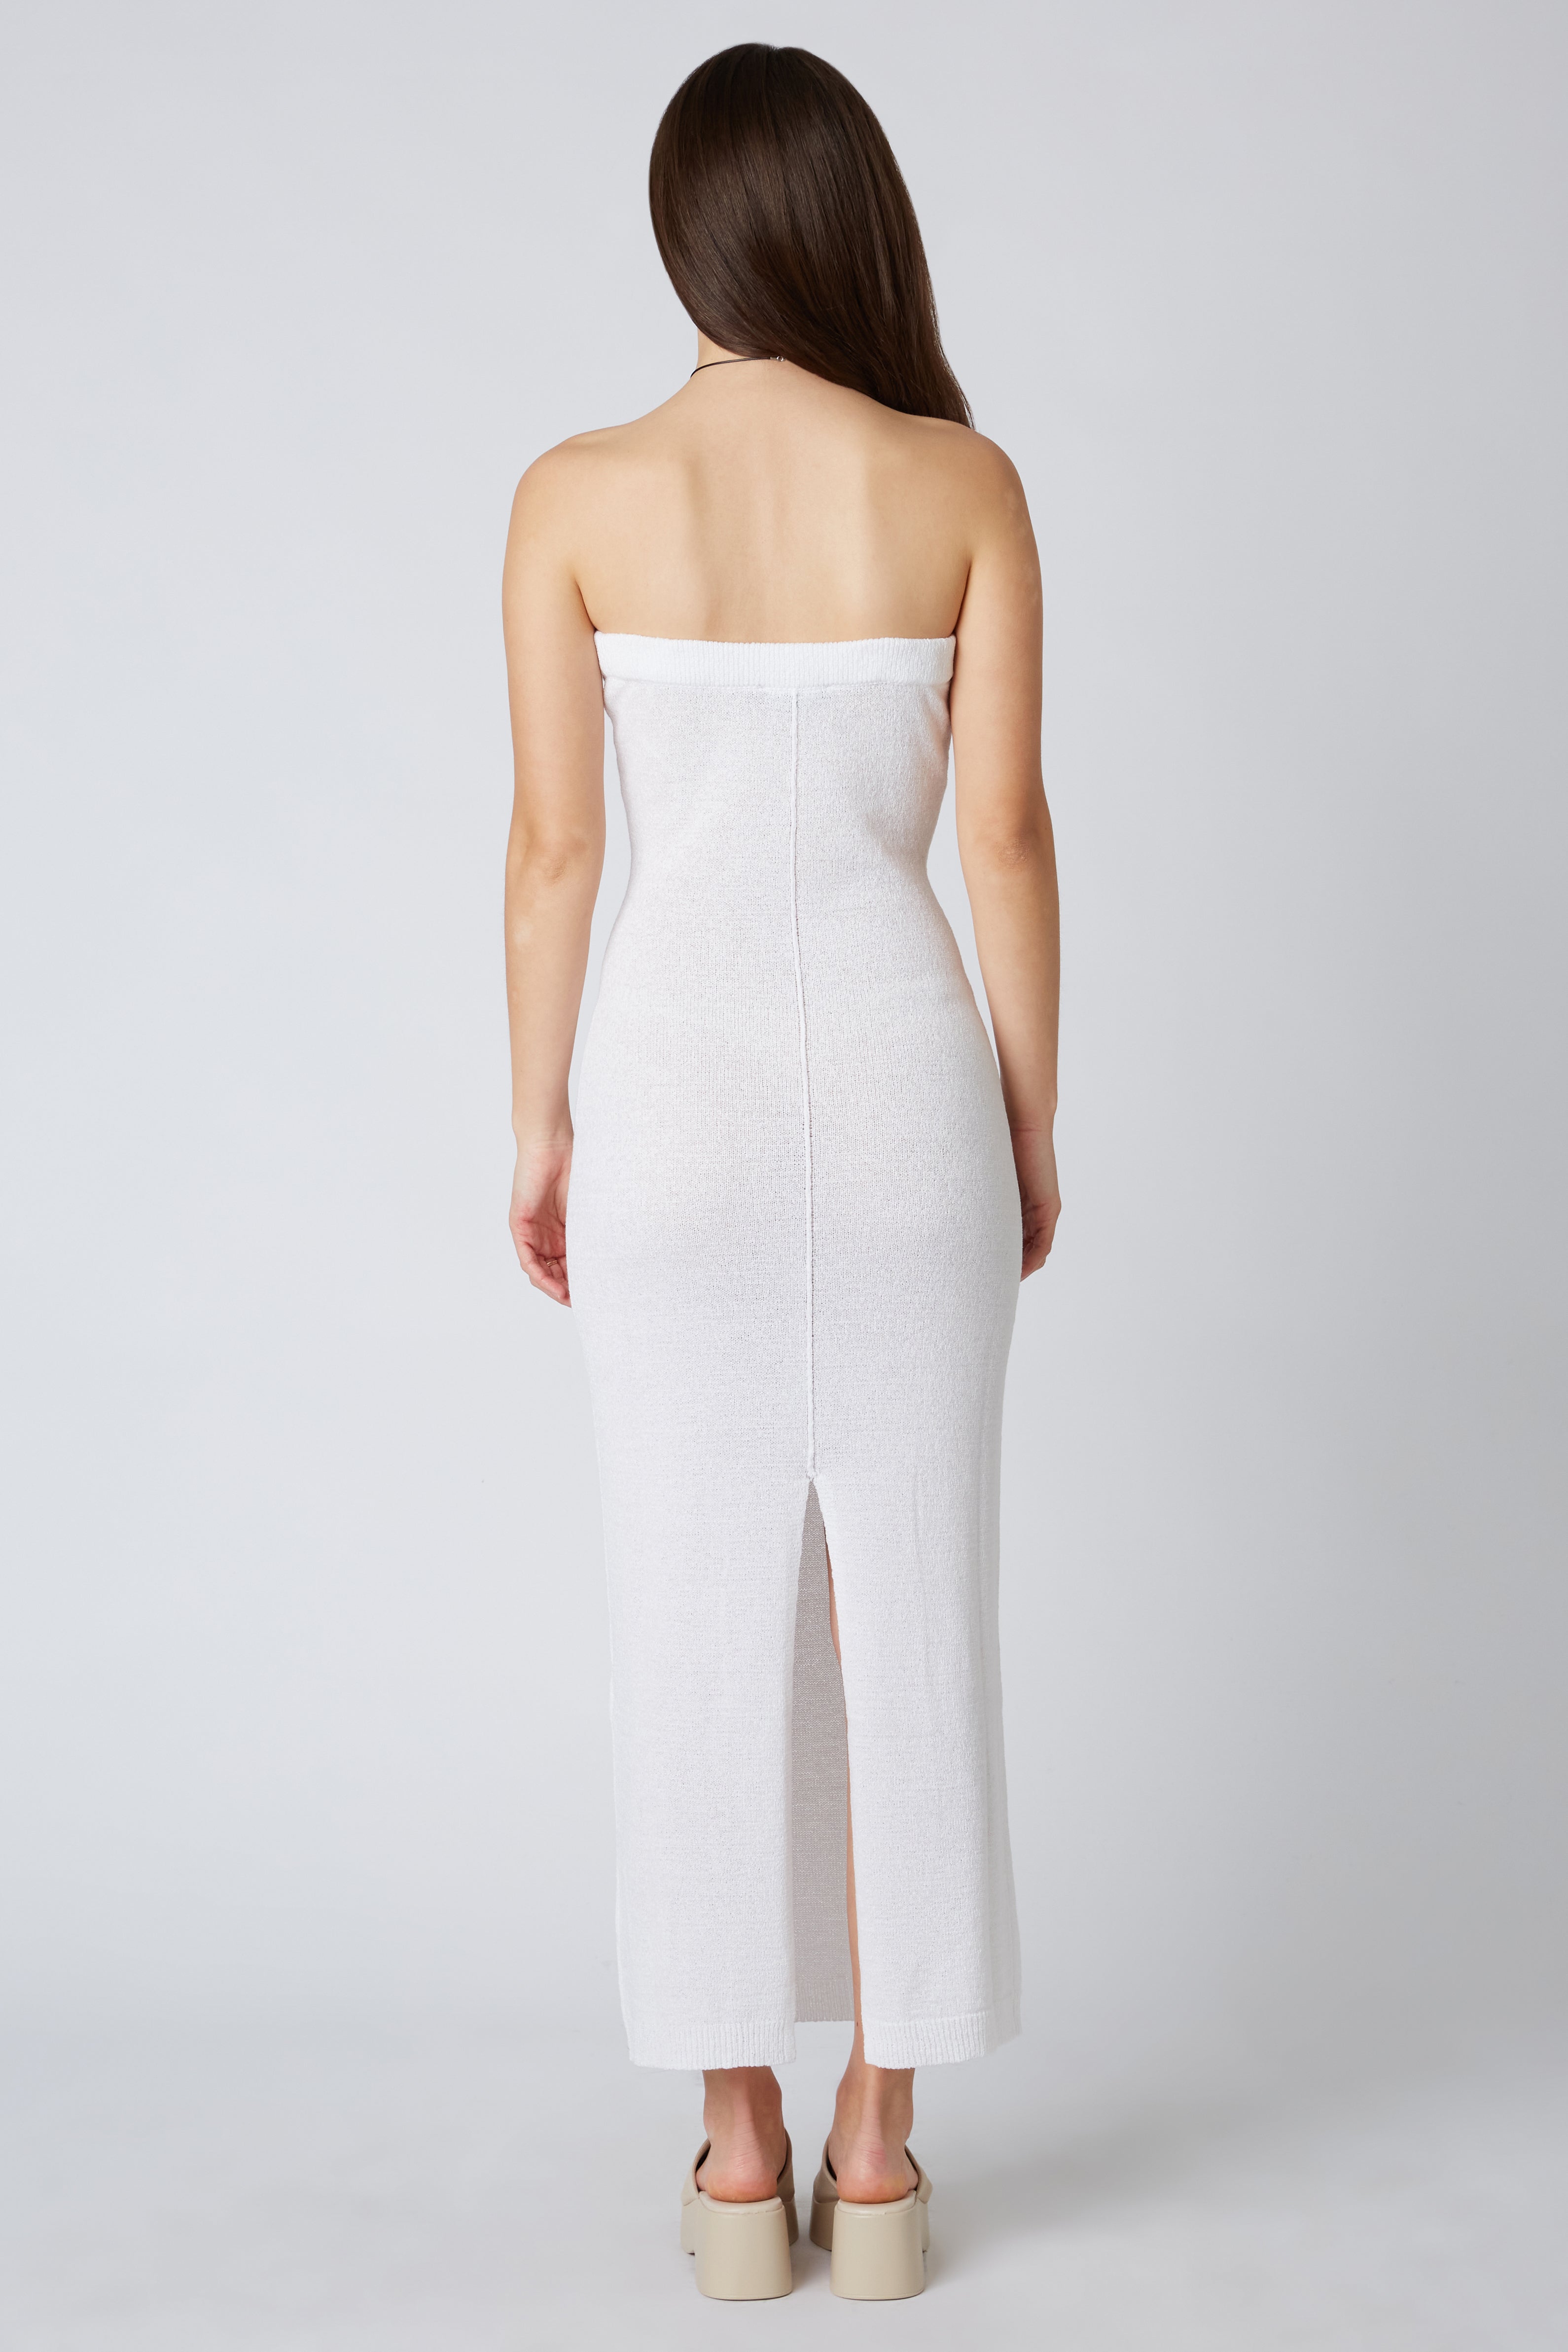 Strapless Knit Maxi Dress in White Back